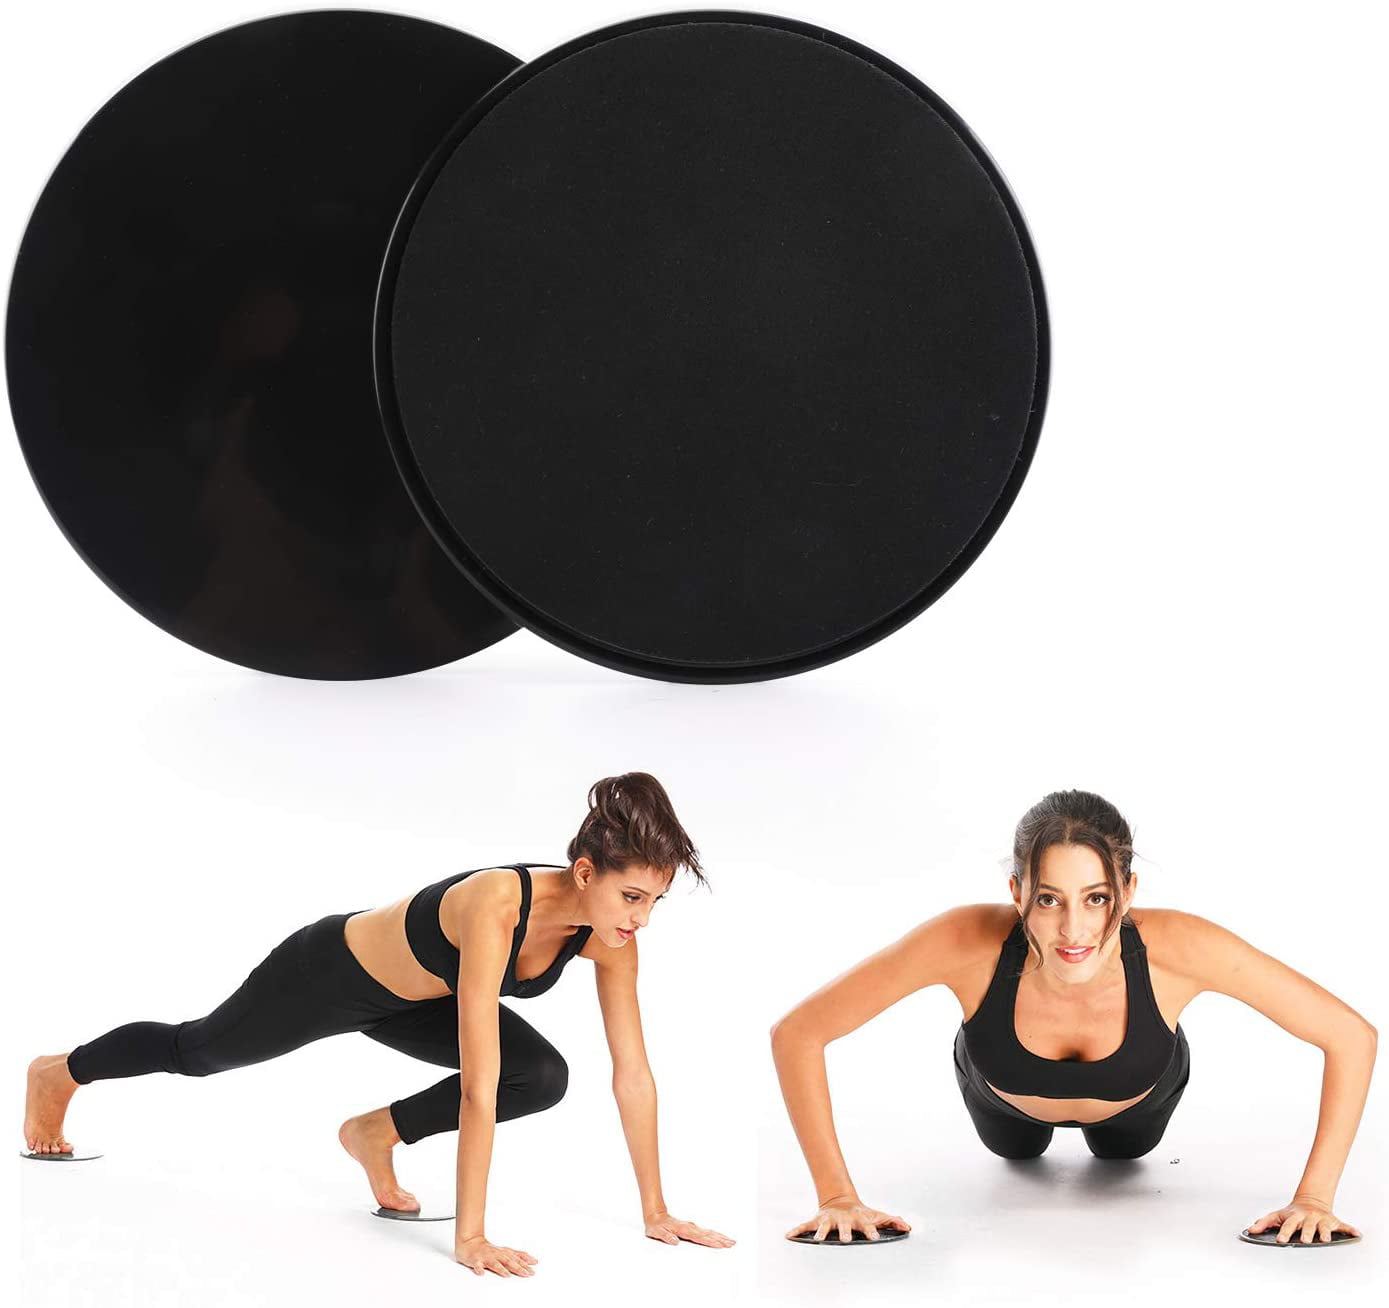 Home Workout. Dual Sided for use on Hardwood Floors and Carpet Abdominal Exercise Fit & Bougie Gliding Discs Core Sliders for Full Body Workout 